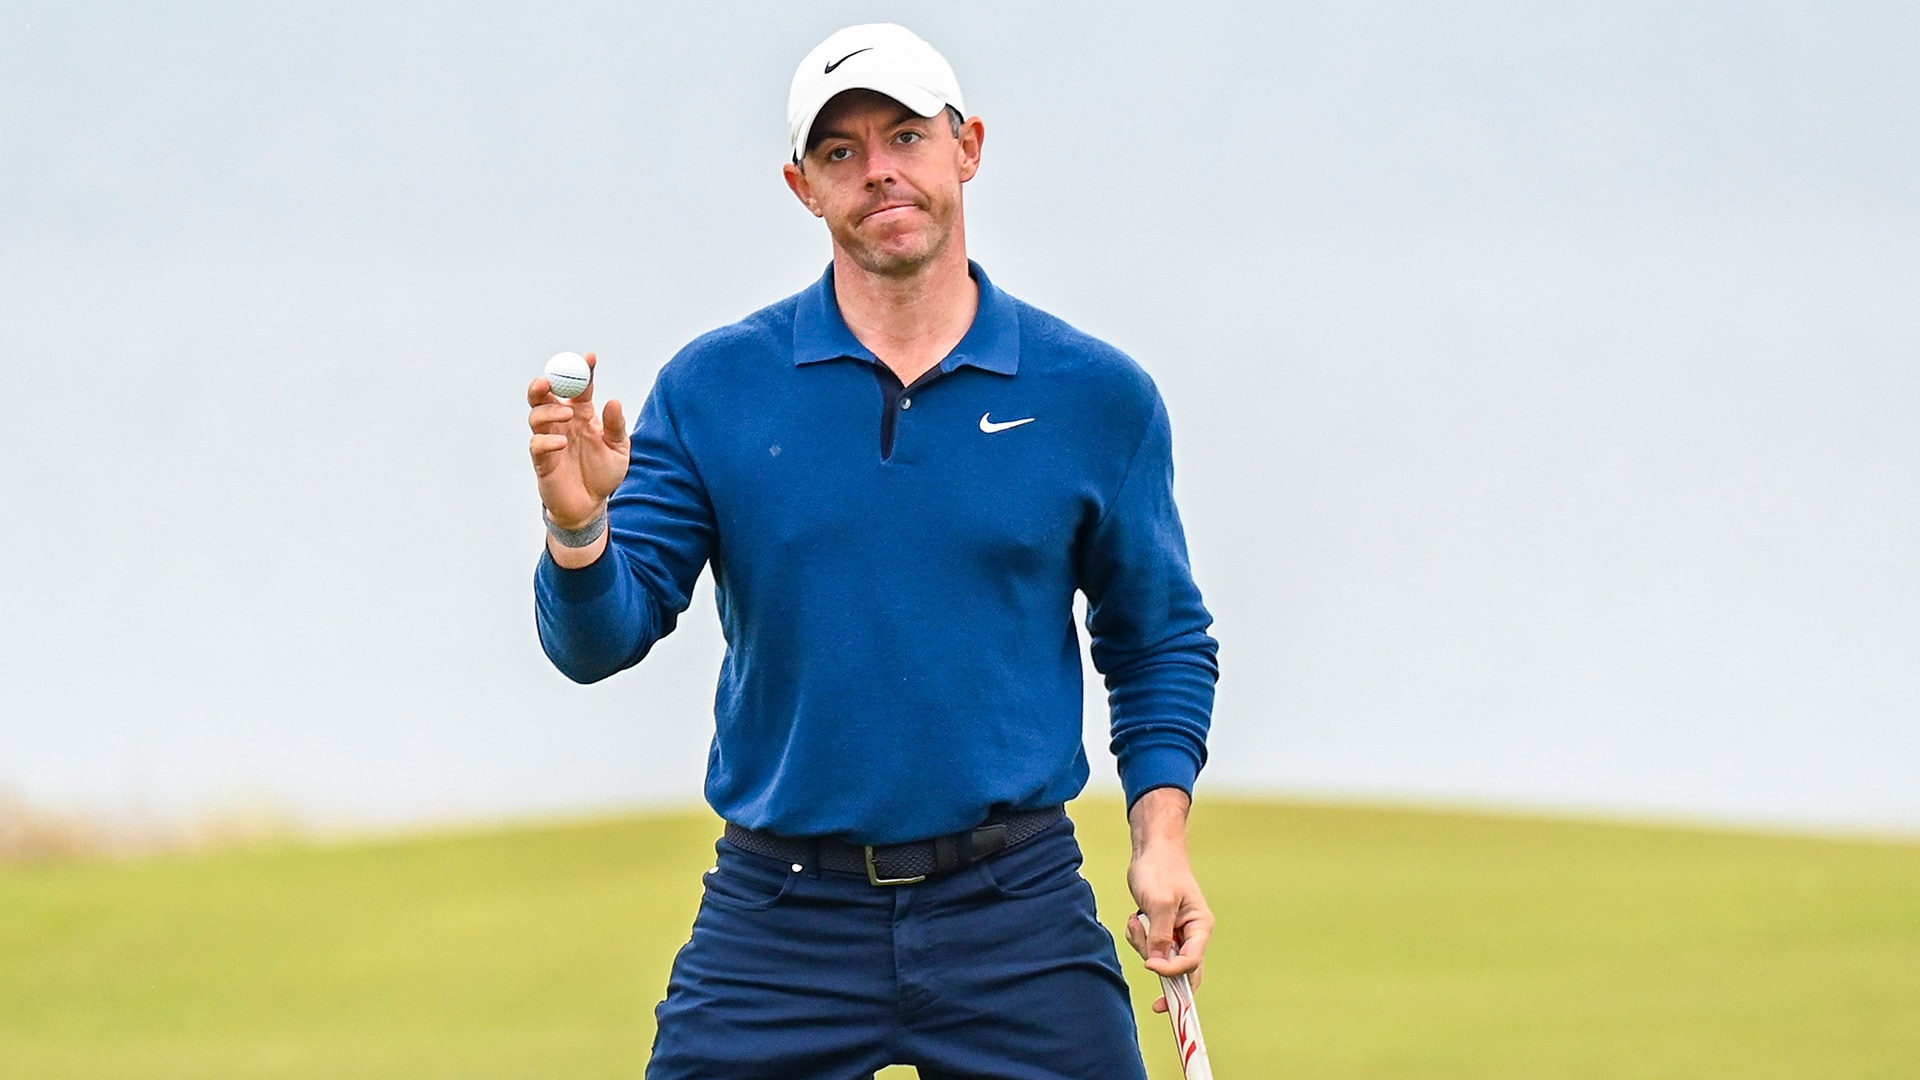 McIlroy can’t buy a putt and still posts 66 to lead Scottish Open